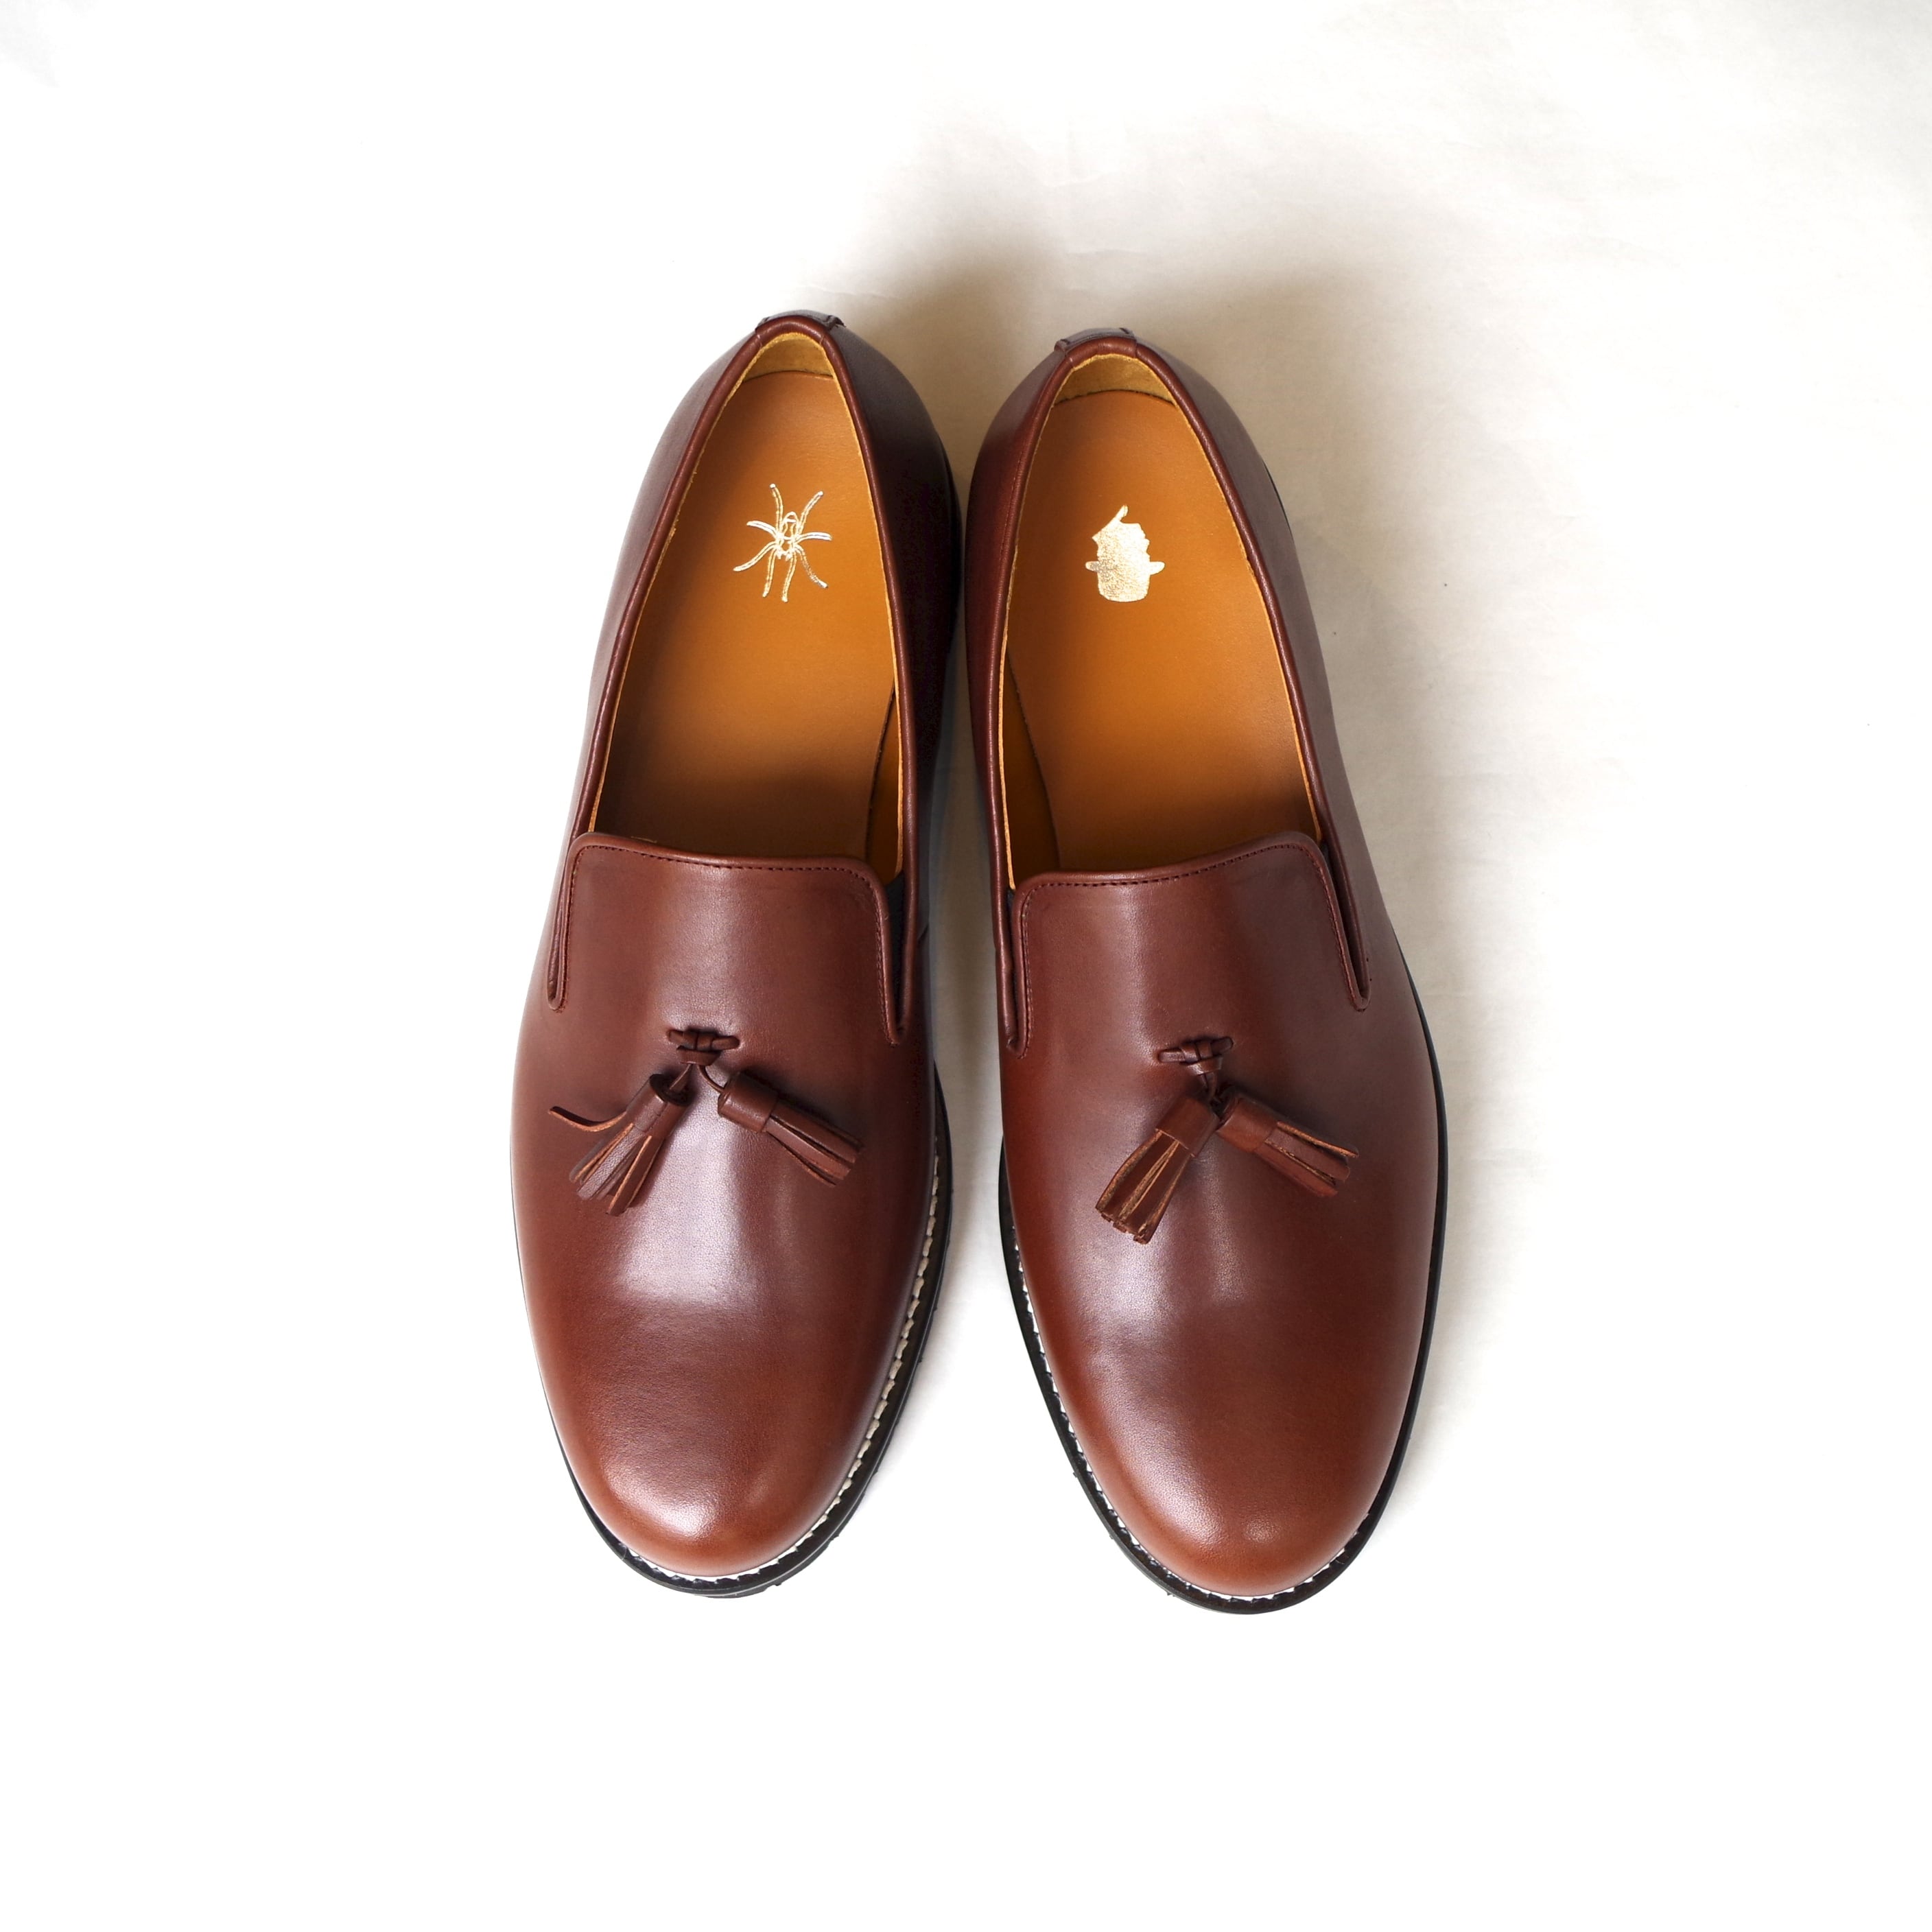 Tomo&Co. Tussel Cock Shoes | 1F Store powered by BASE